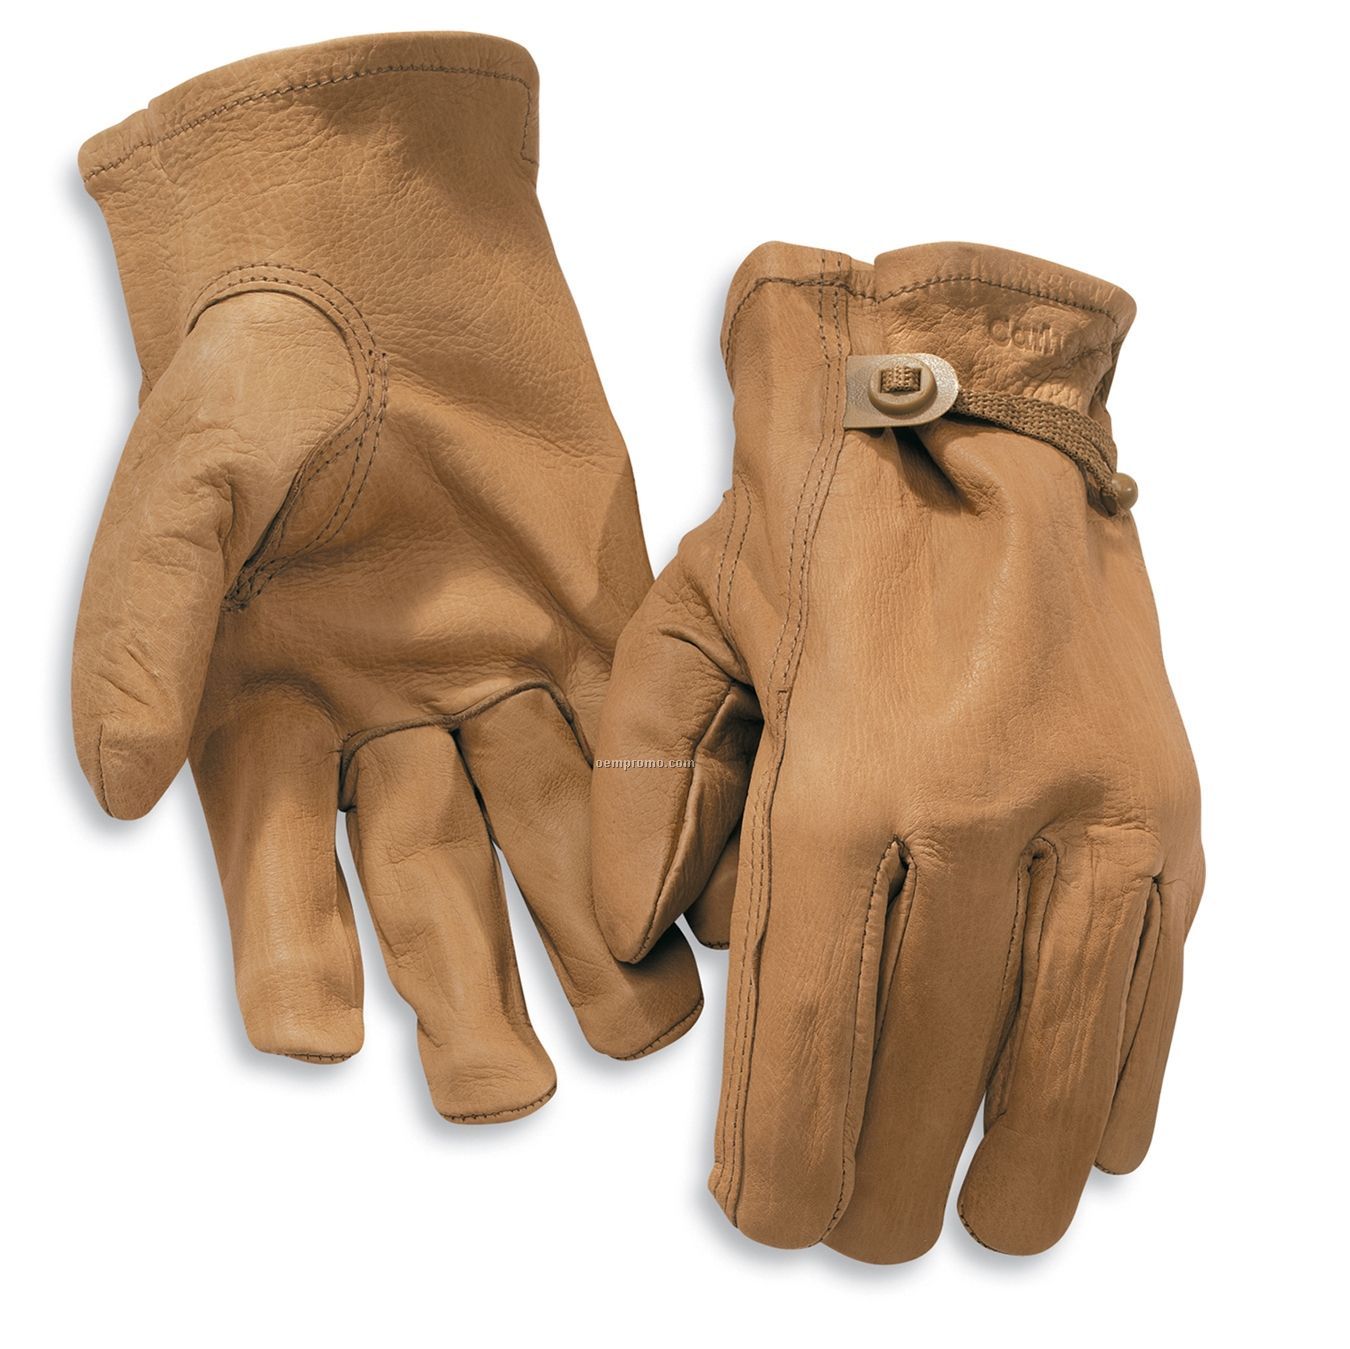 Carhartt Men's Leather Driver Glove With Adjustable Wrist / Grain Cowhide